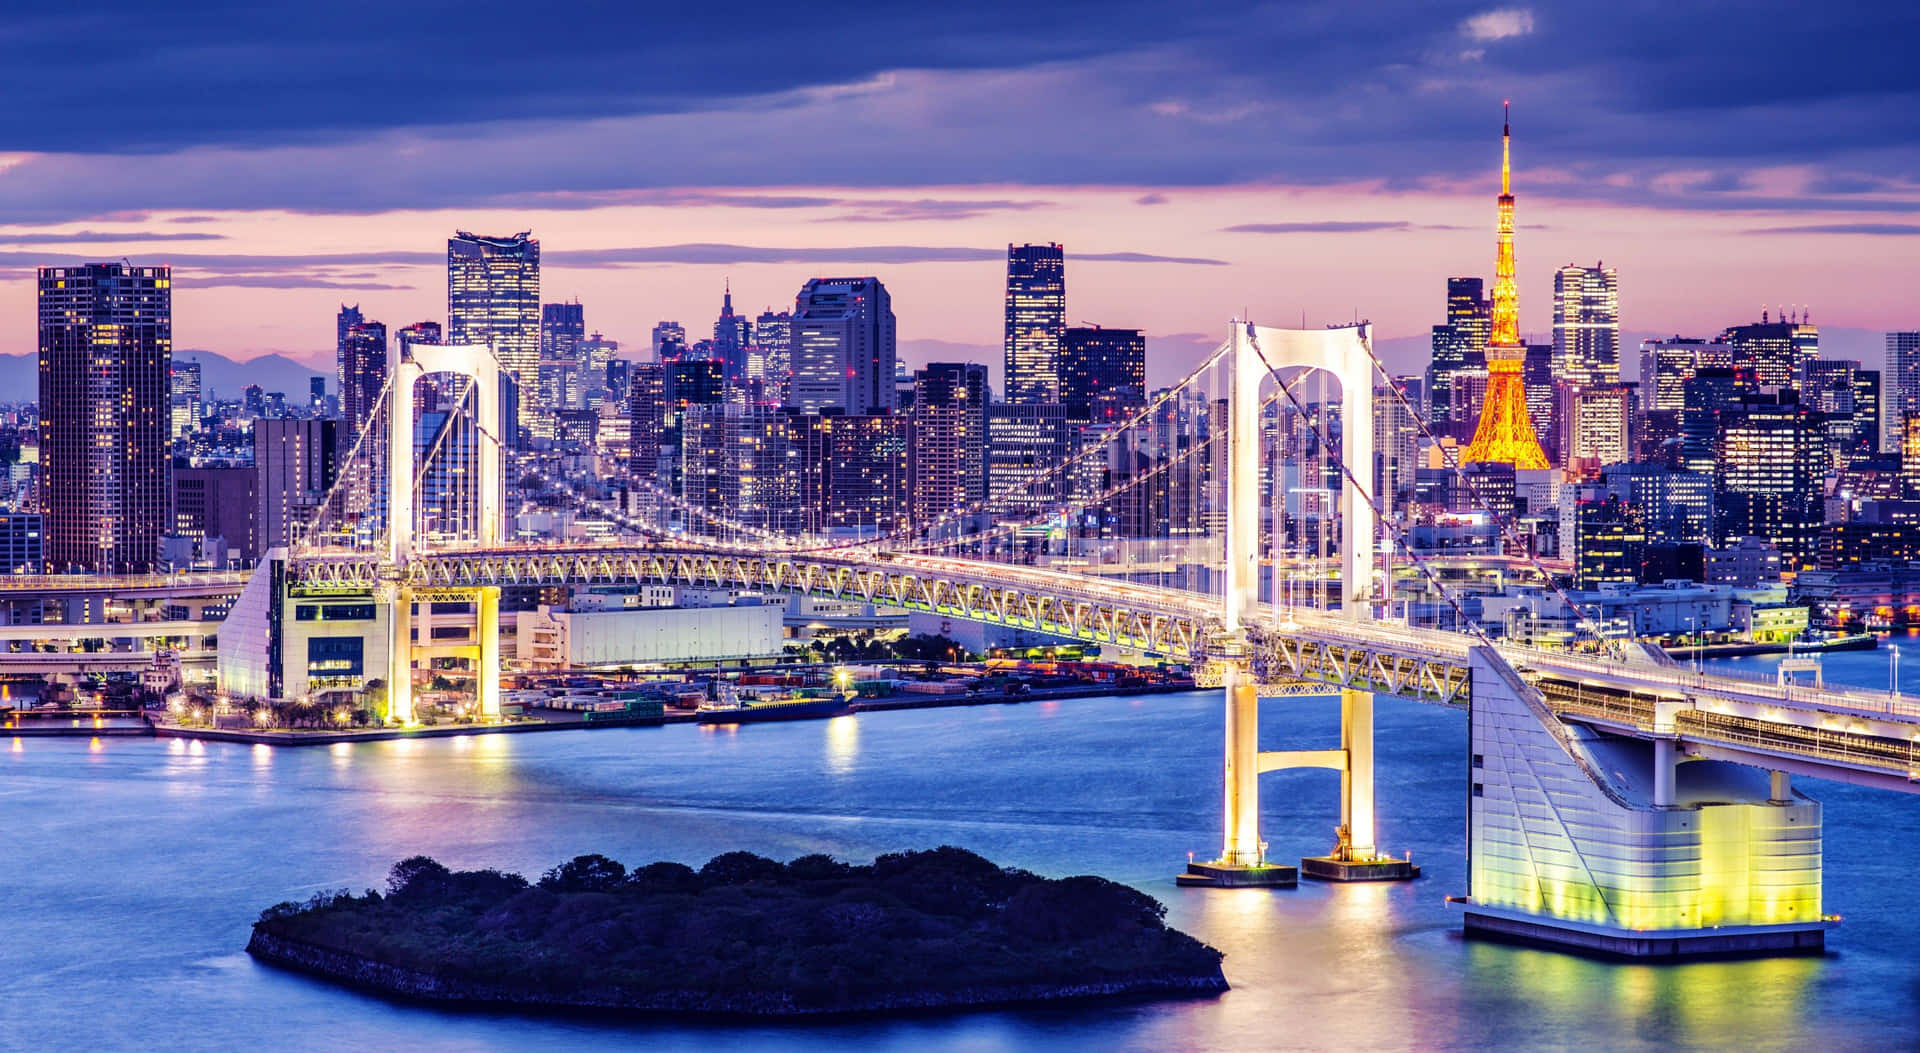 A view of the iconic Rainbow Bridge connecting Tokyo and Odaiba, Japan